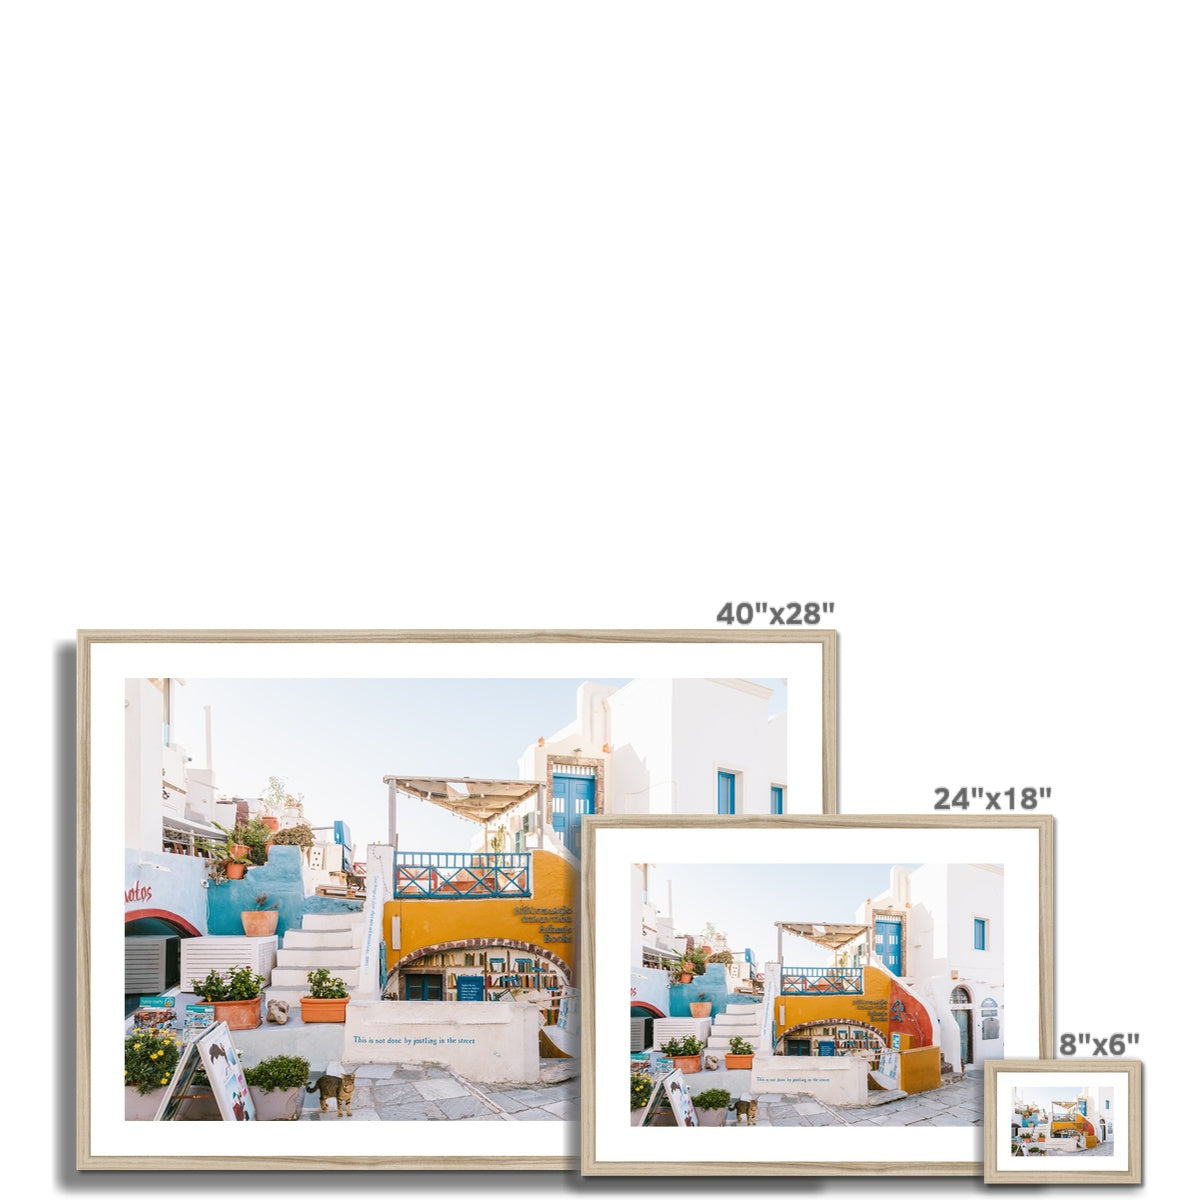 OIA BOOKSTORE Framed & Mounted Print